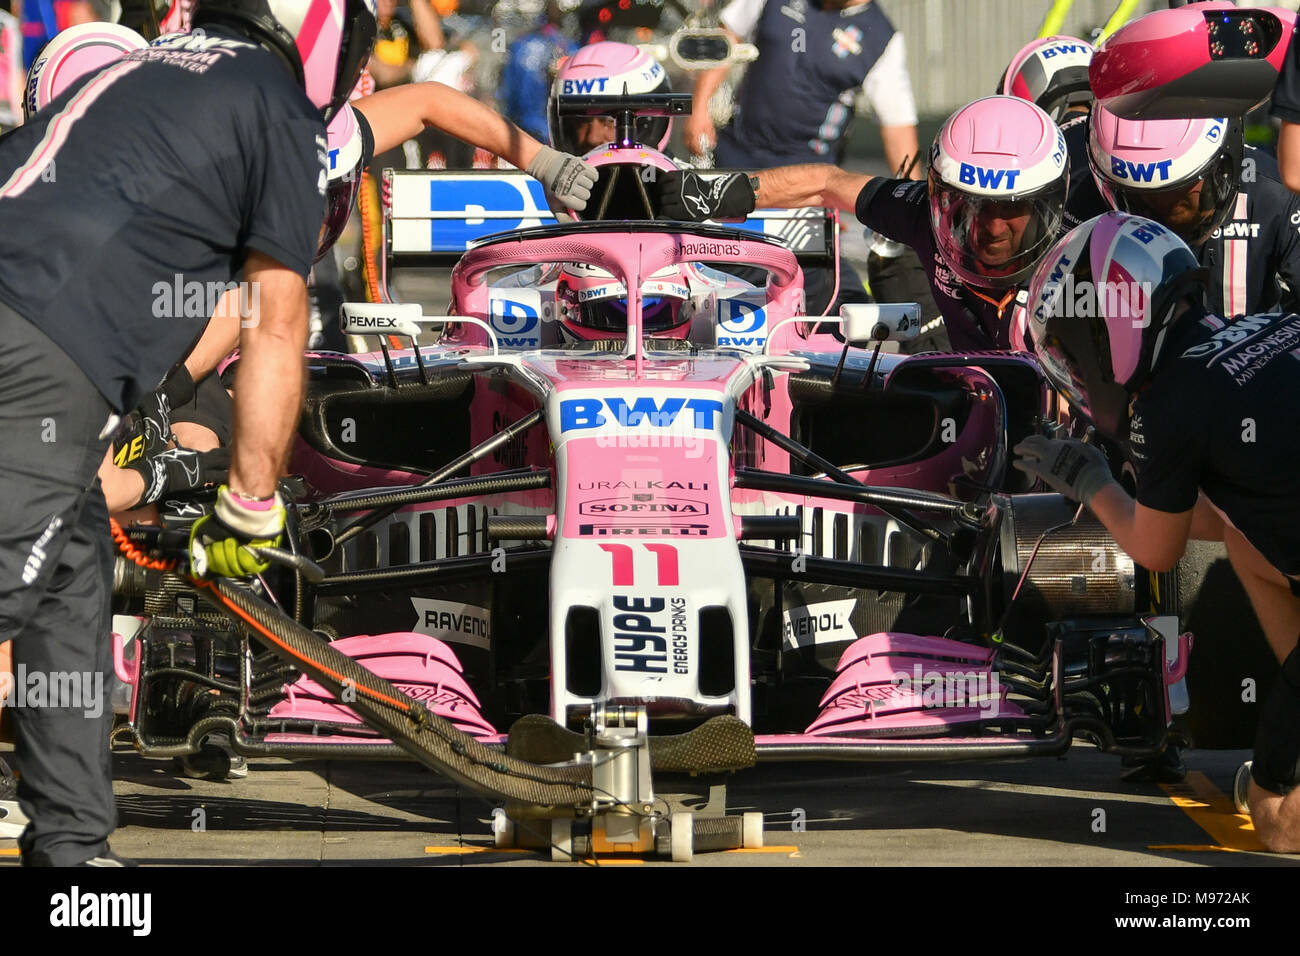 Albert Park, Melbourne, Australia. 23rd Mar, 2018. Sergio Perez (MEX) #11 from the Sahara Force India F1 team practising a pit stop during practice session two at the 2018 Australian Formula One Grand Prix at Albert Park, Melbourne, Australia. Sydney Low/Cal Sport Media/Alamy Live News Stock Photo